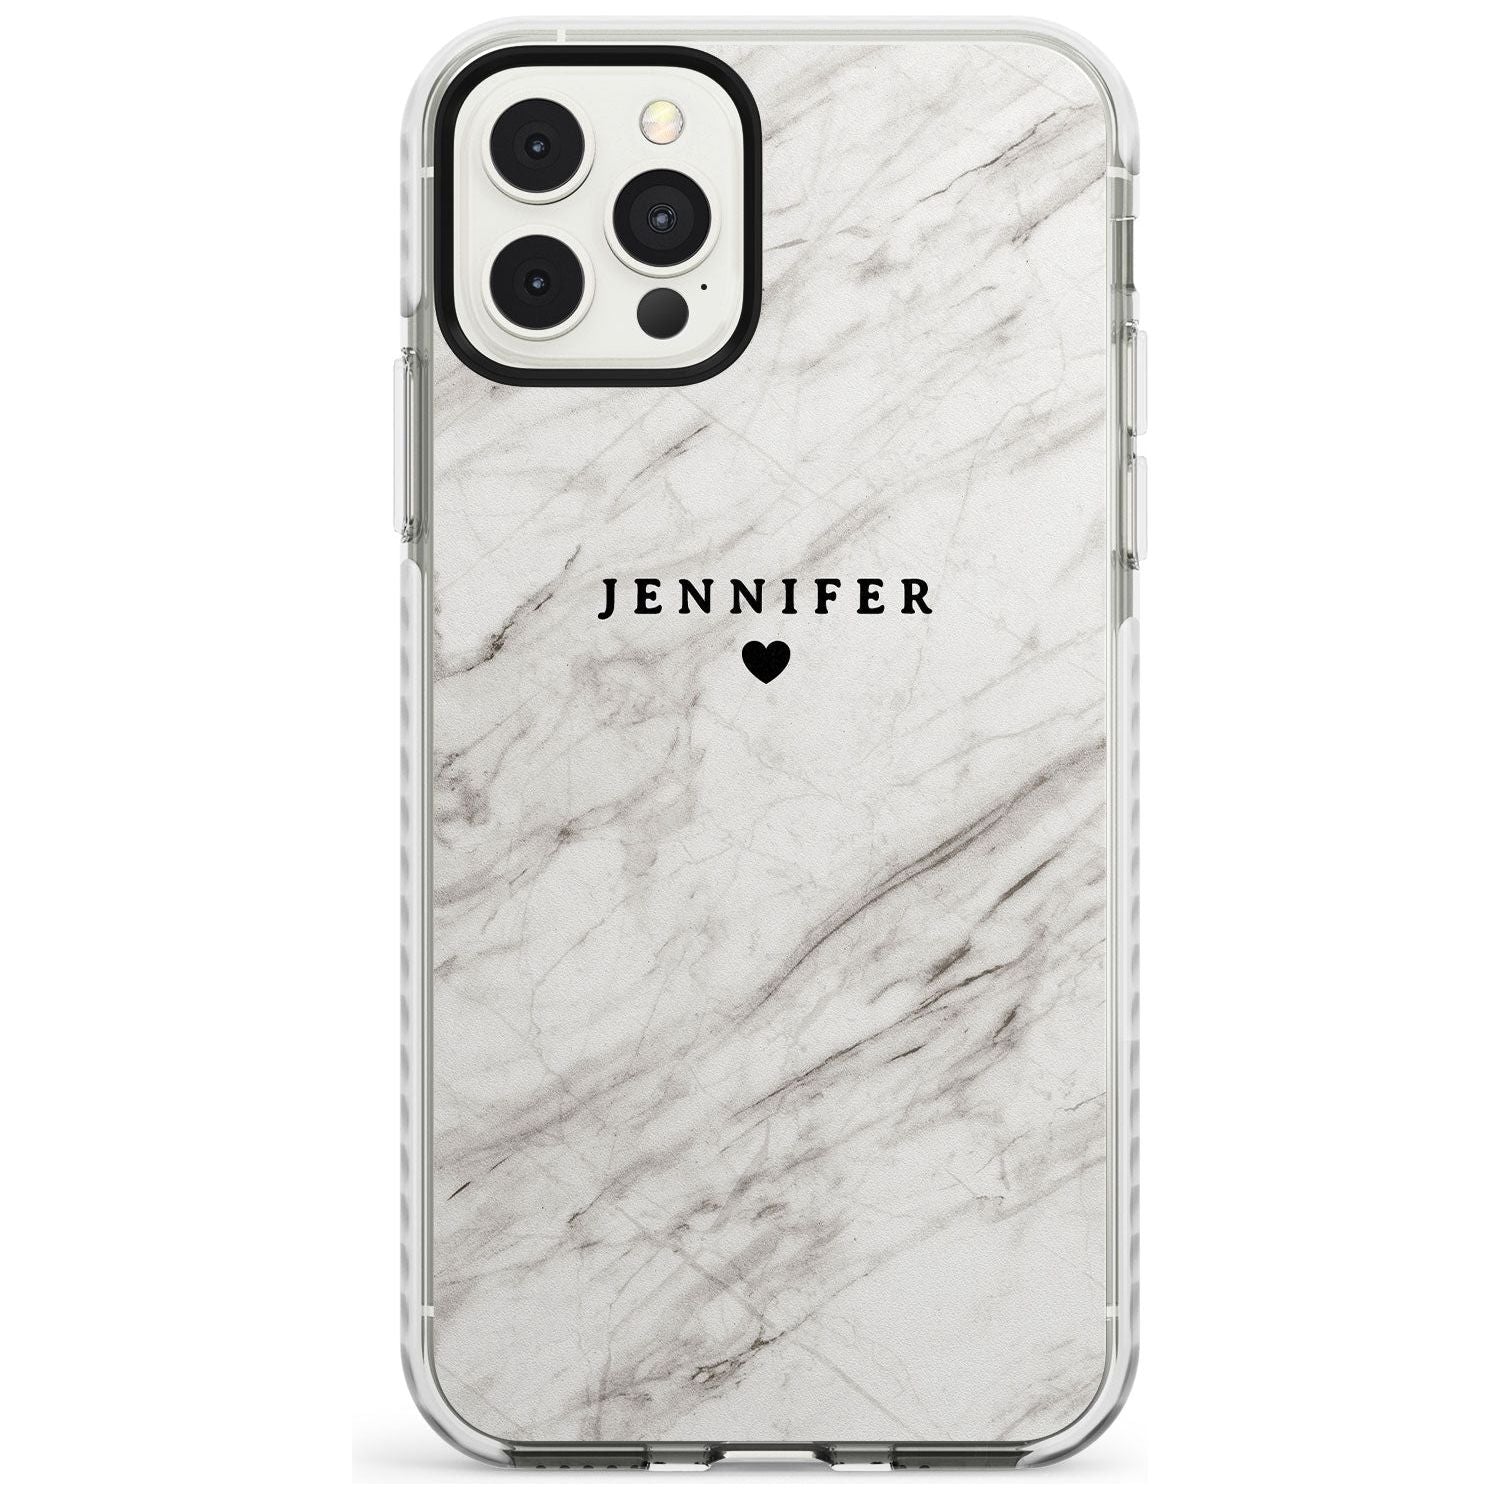 Personalised Light Grey & White Marble Slim TPU Phone Case for iPhone 11 Pro Max